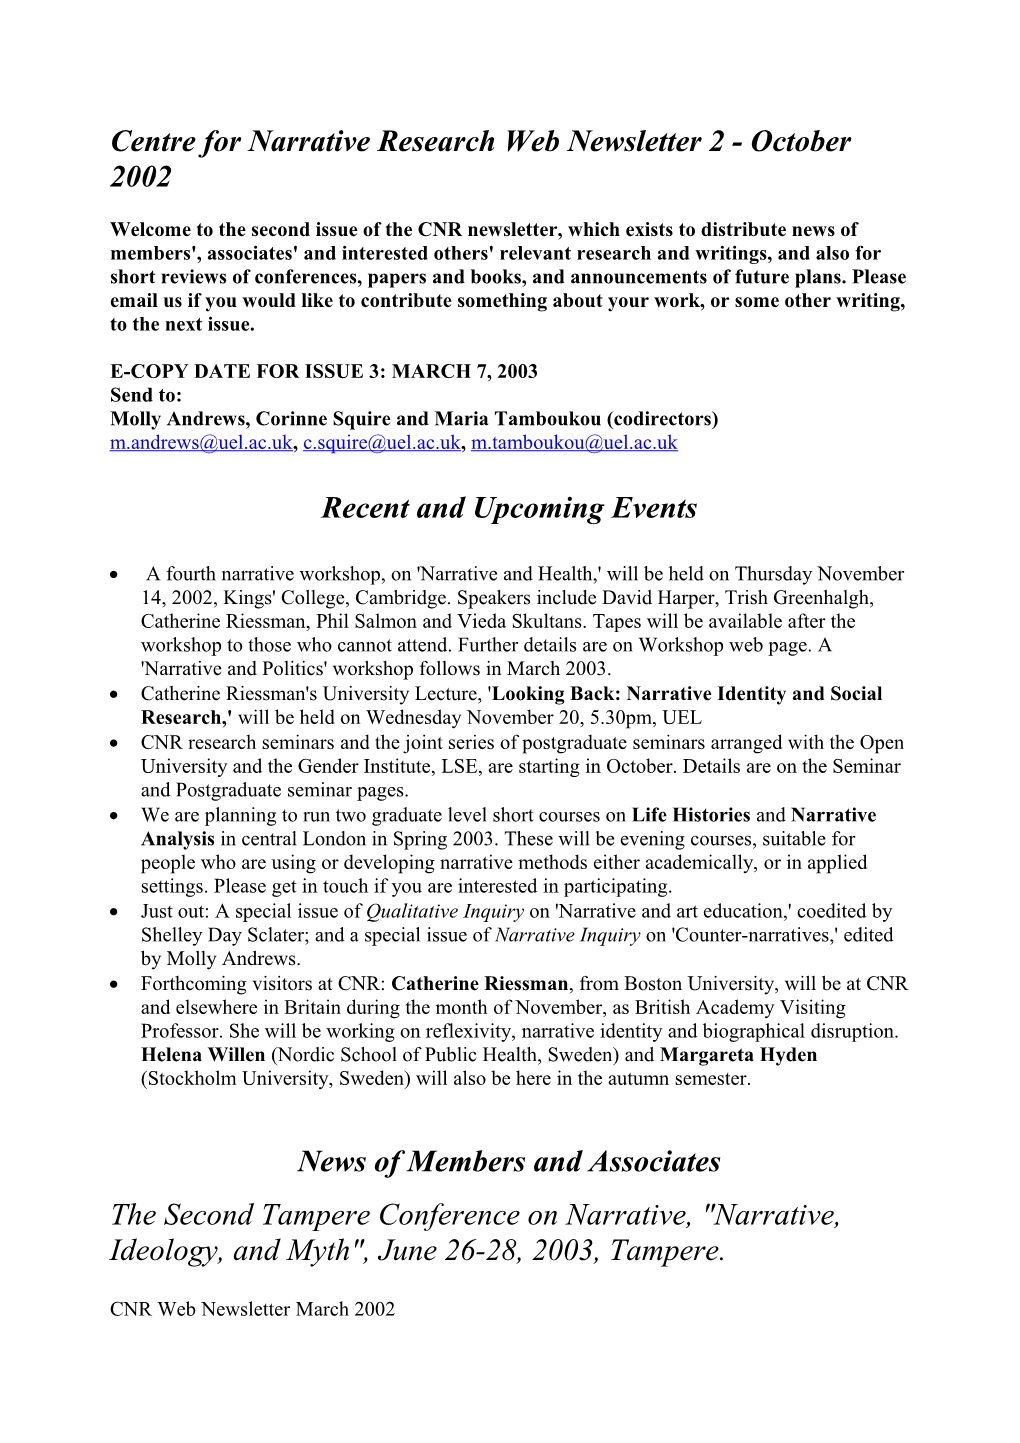 Centre for Narrative Research Web Newsletter 1 - April 2002